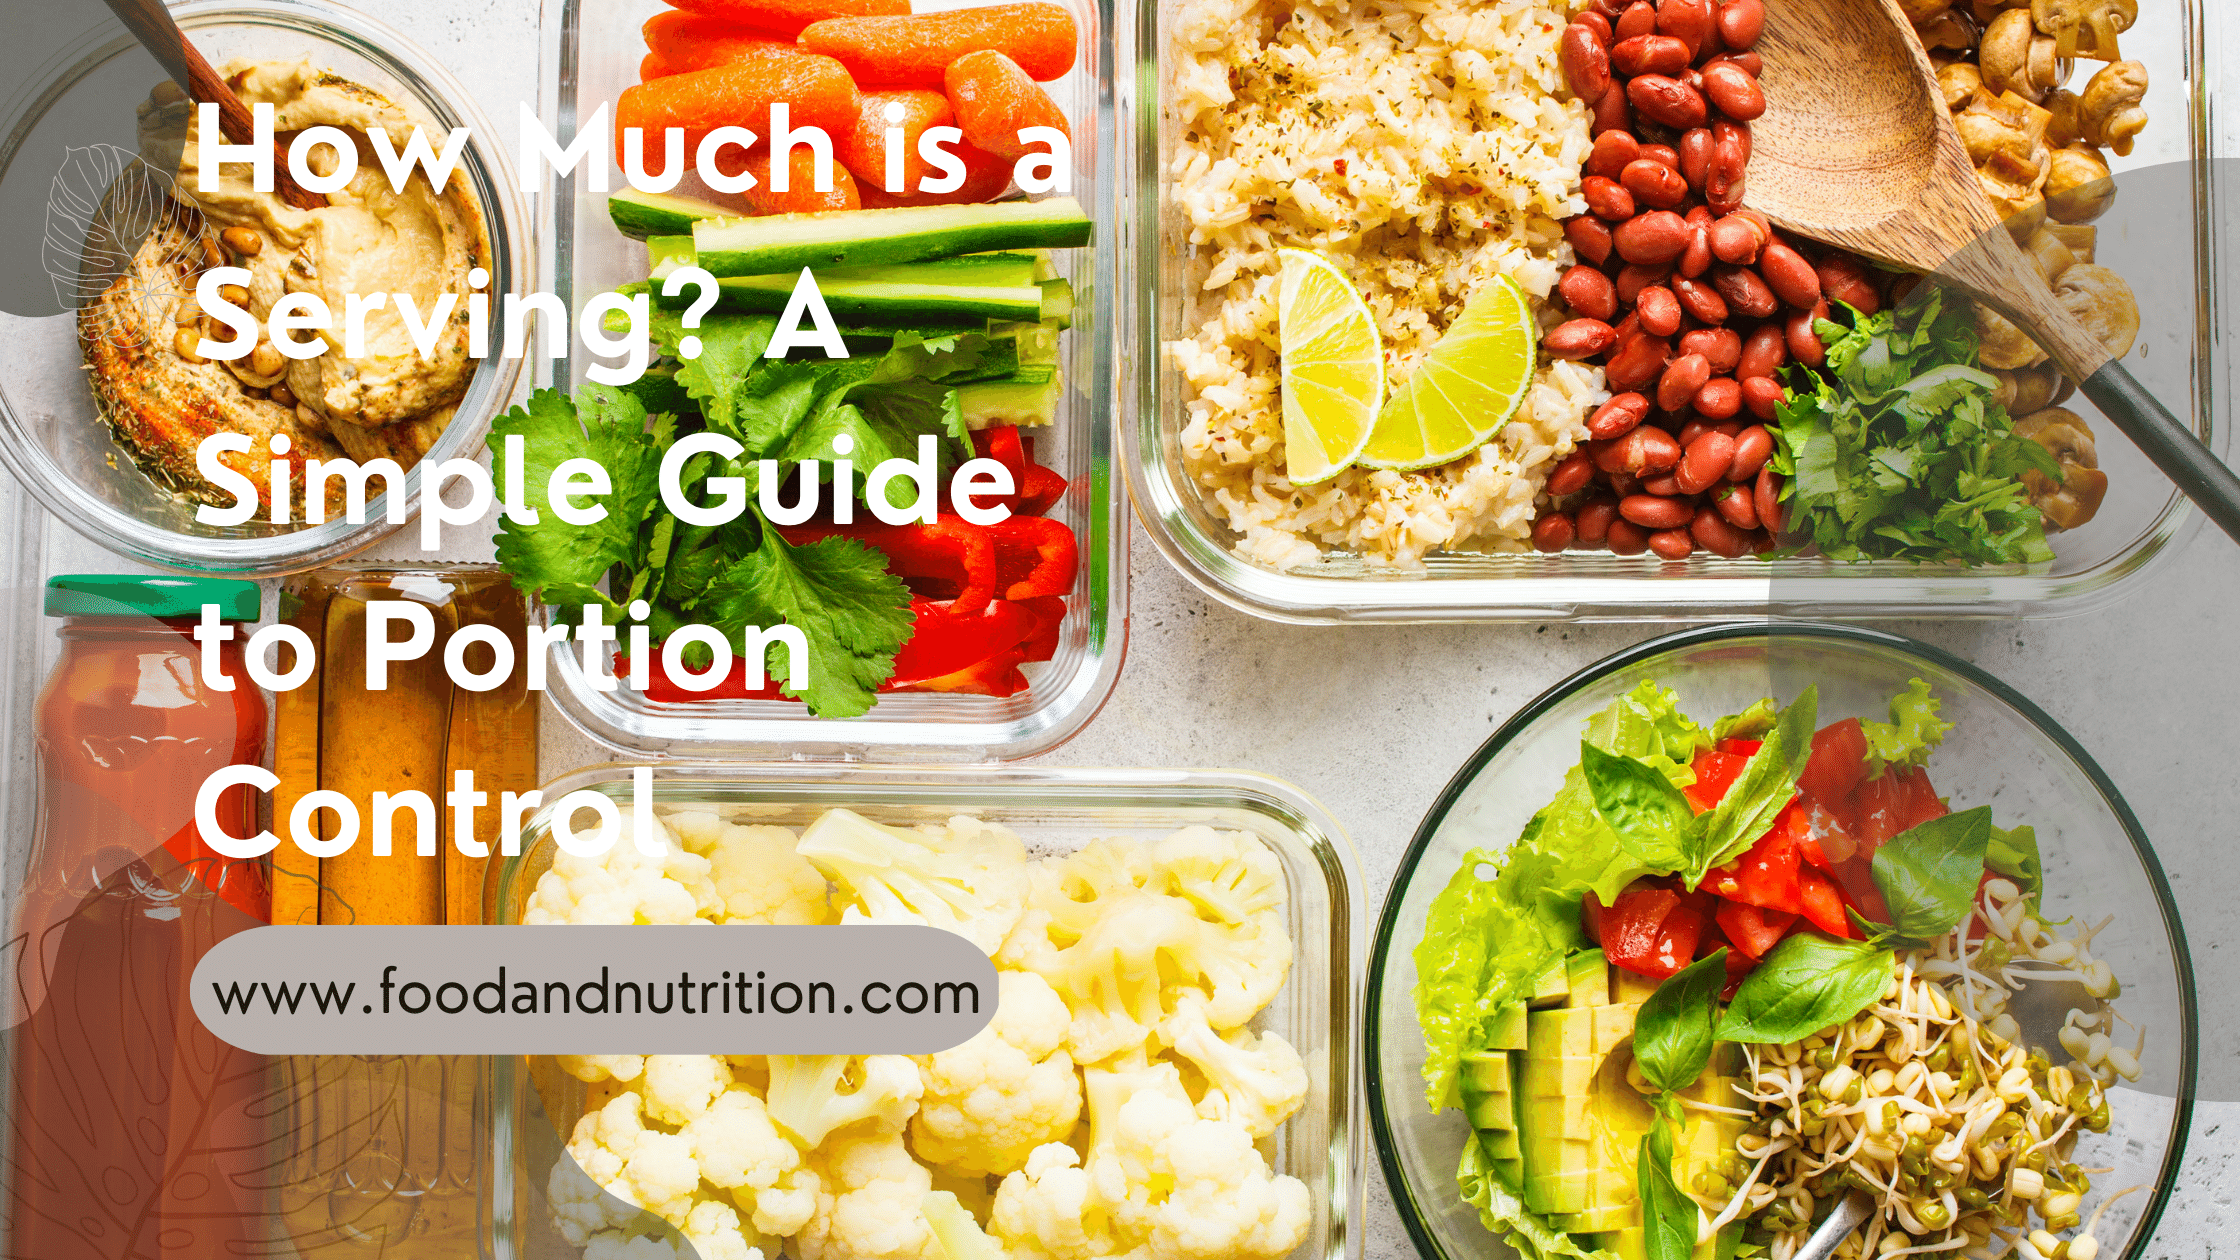 How Much is a Serving? A Simple Guide to Portion Control